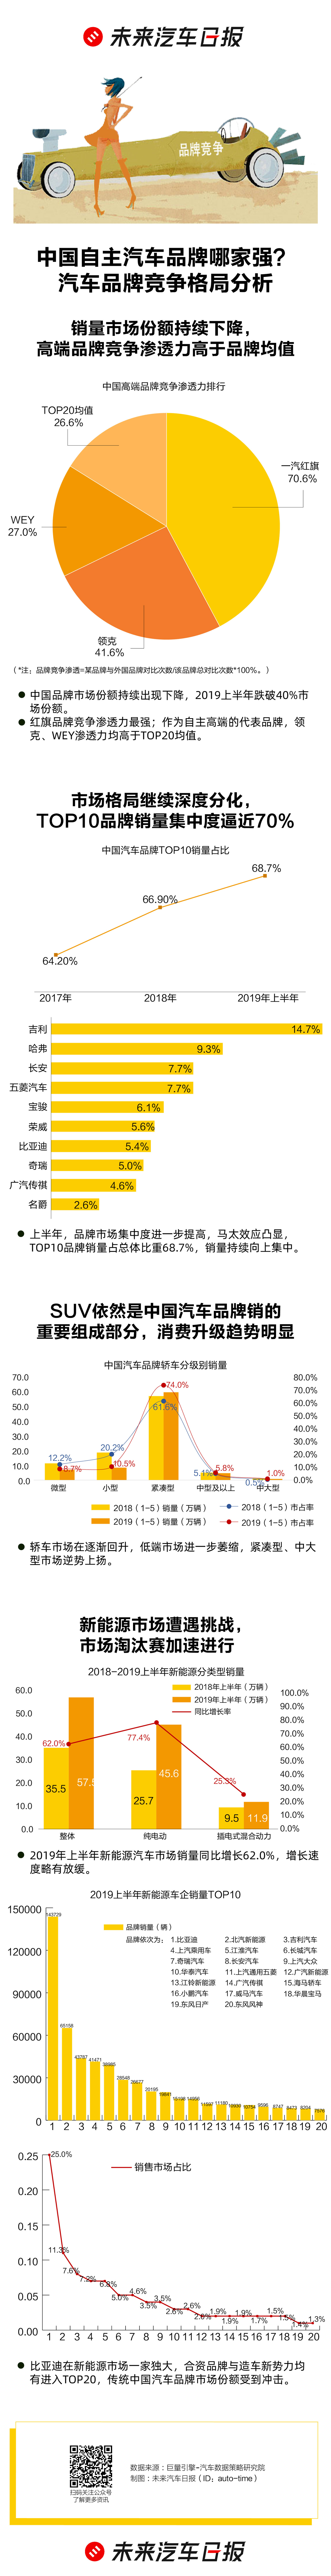 Small data| Which Chinese car company is strong: Red flag high penetration, Geely TOP1, BYD electric one big